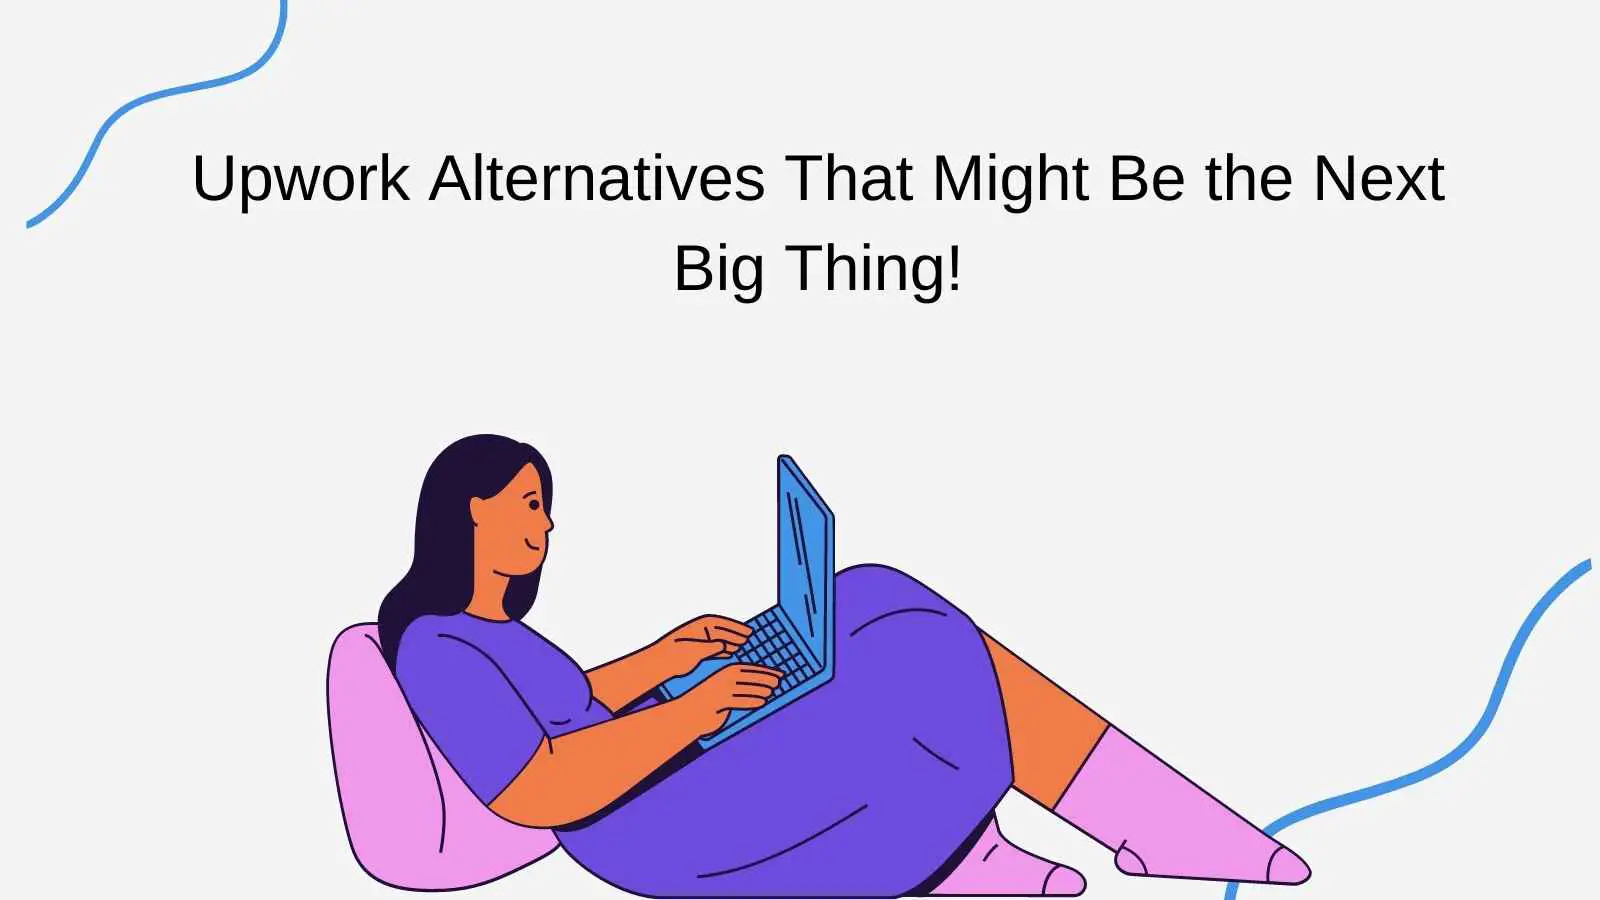 Upwork Alternatives That Might Be the Next Big Thing!